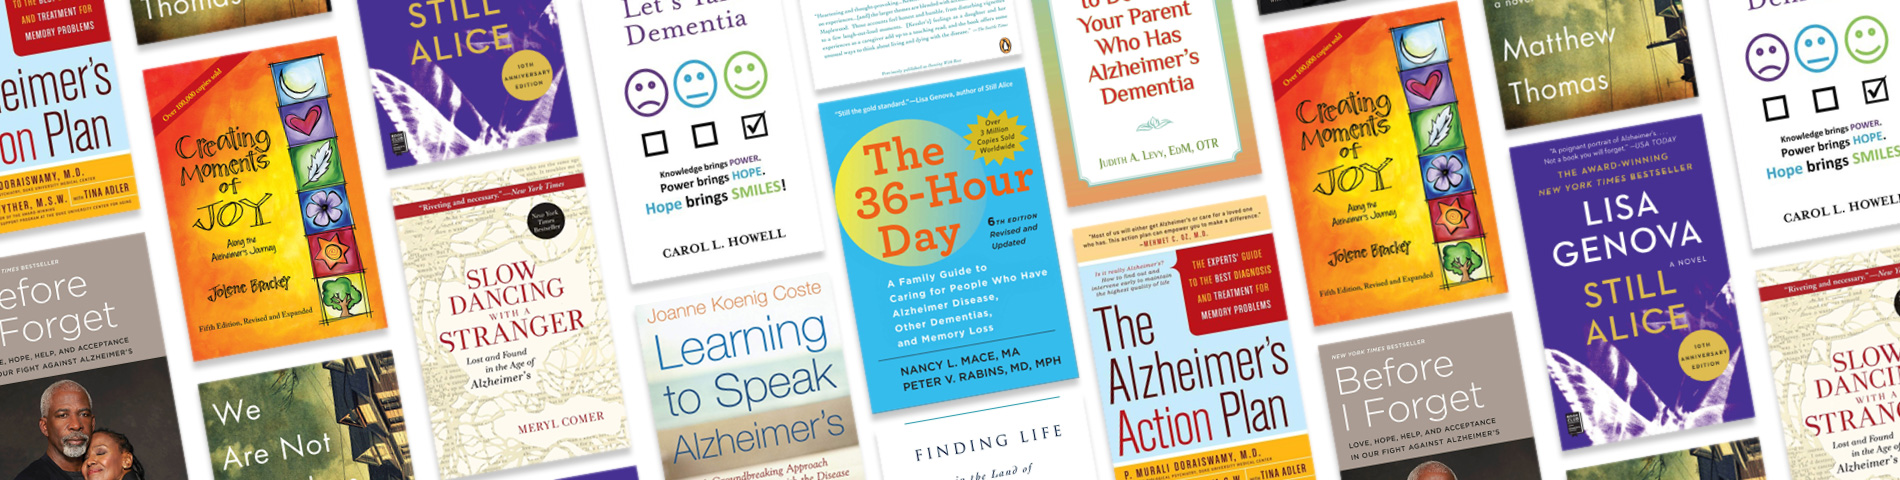 Books to Read about Alzheimer’s and Dementia for Caregivers